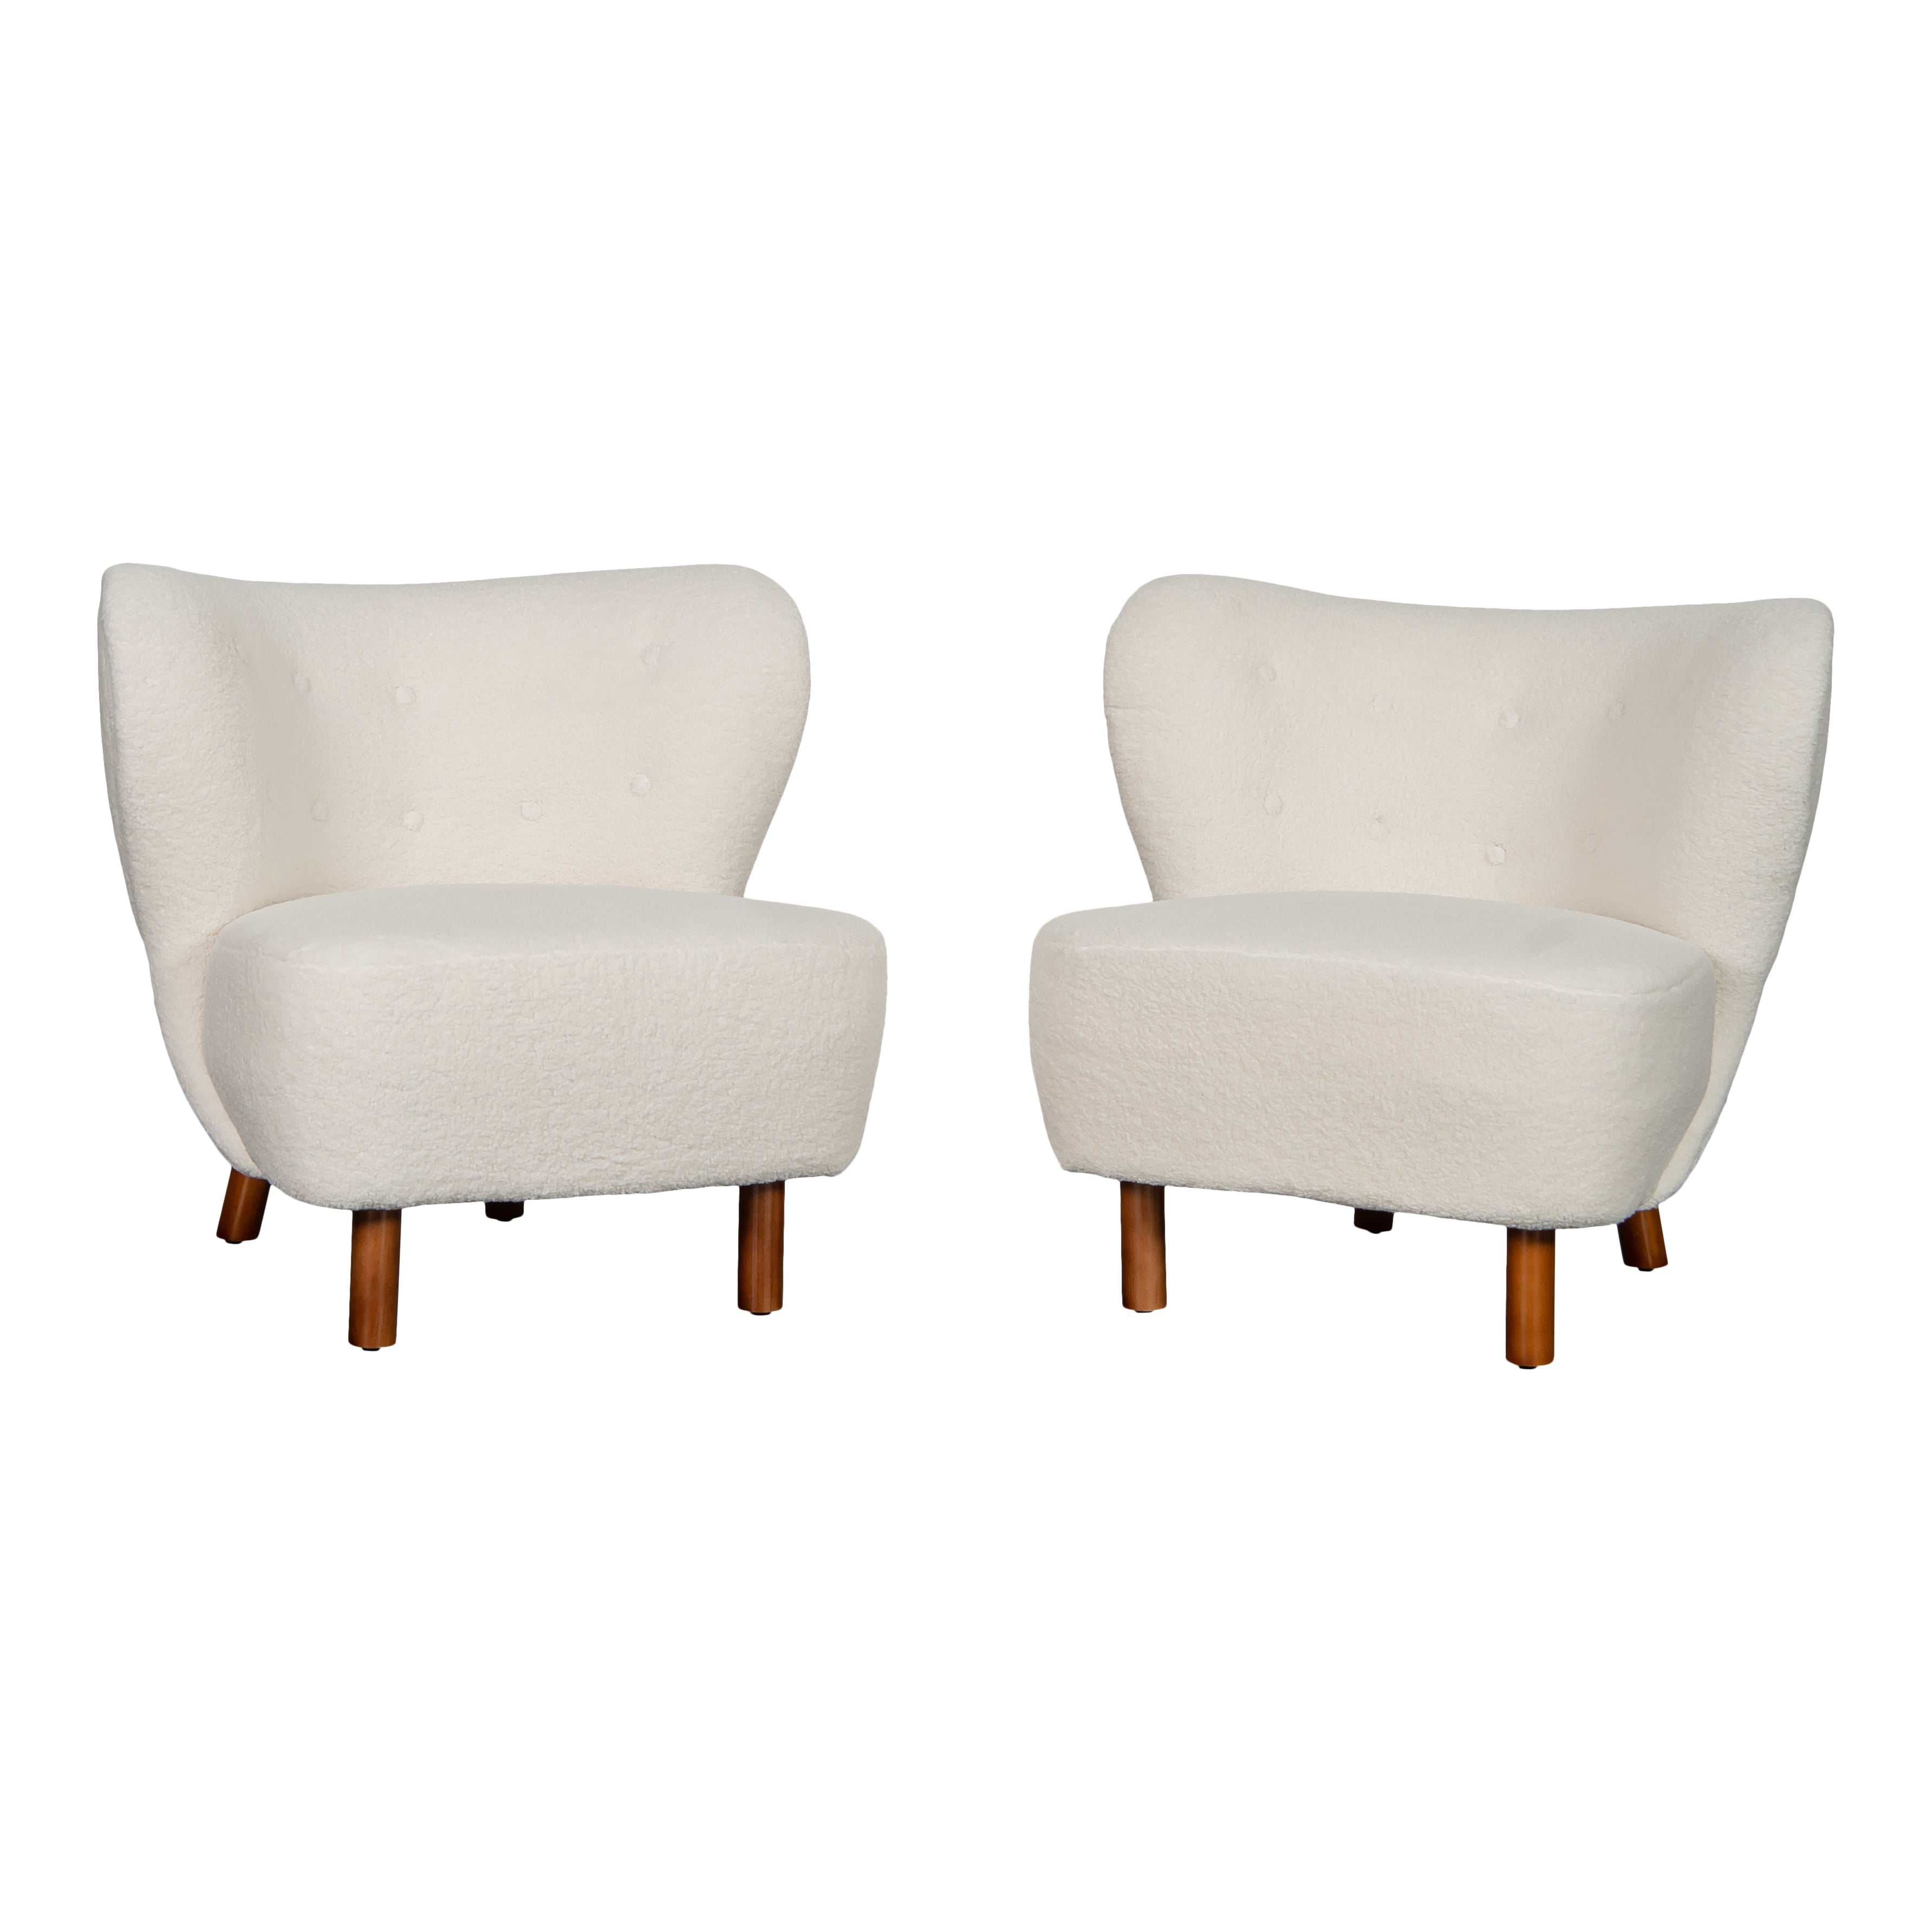 Berty Ivory Chair